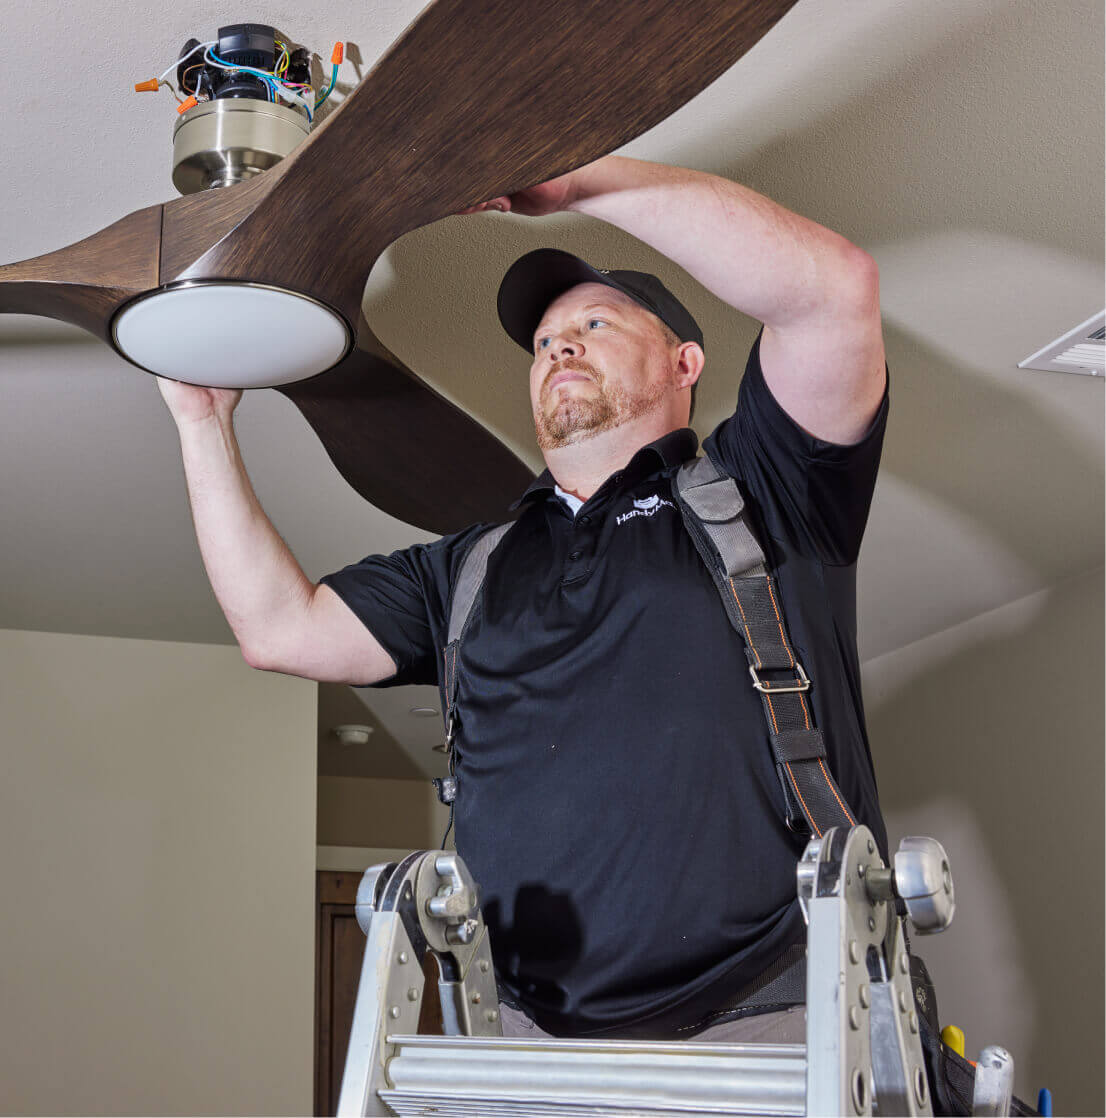 Handyman insurance in New Hampshire tailored for your business